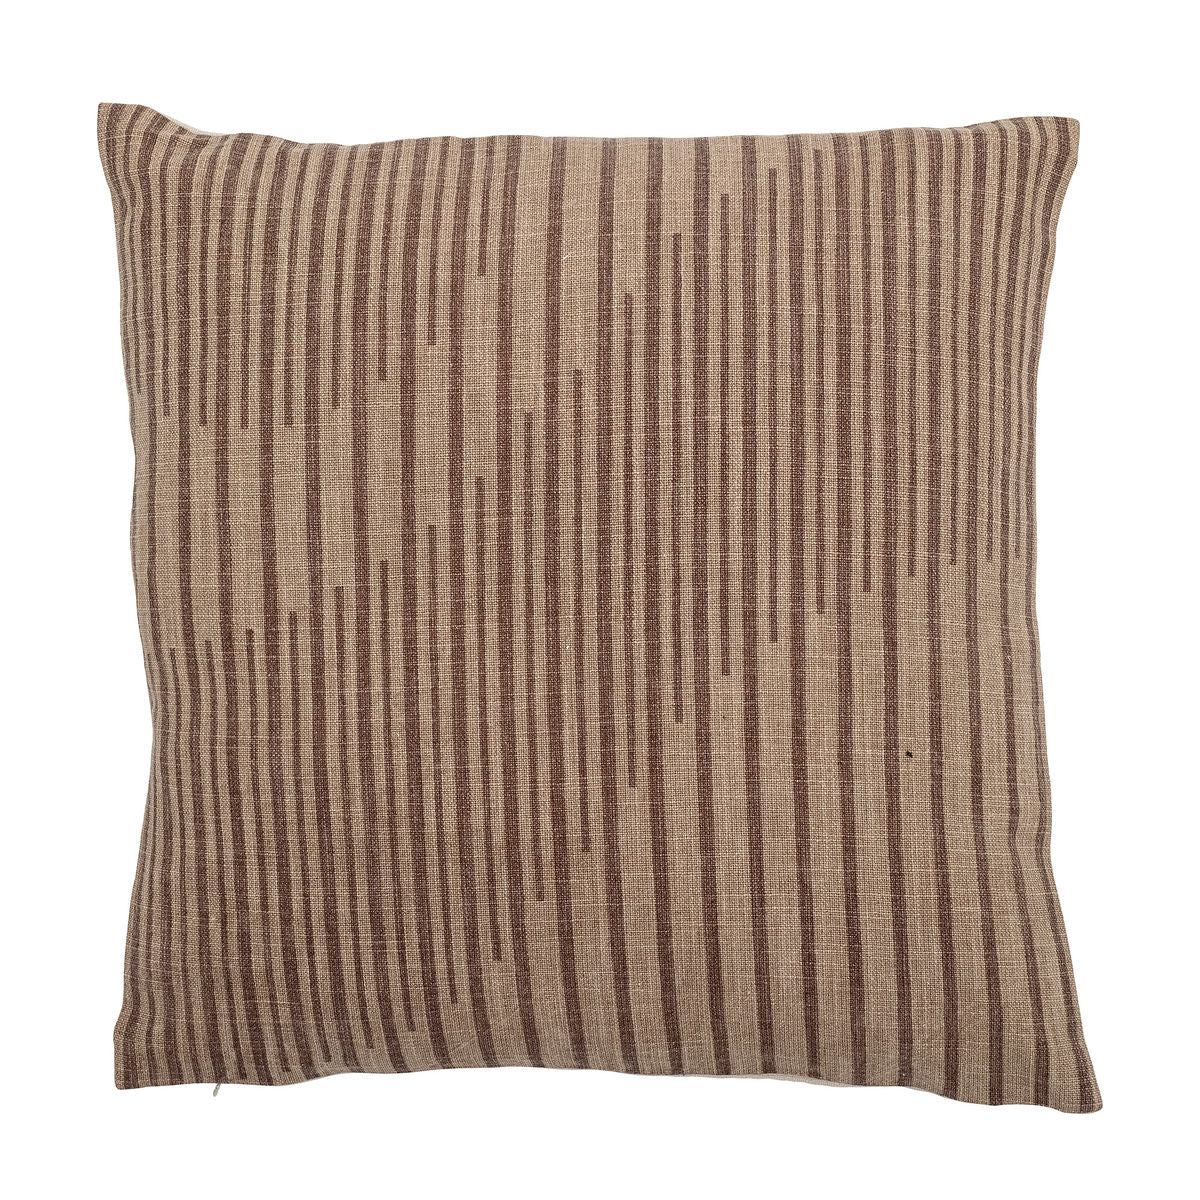 Bloomingville withham pillow, brown, cotton